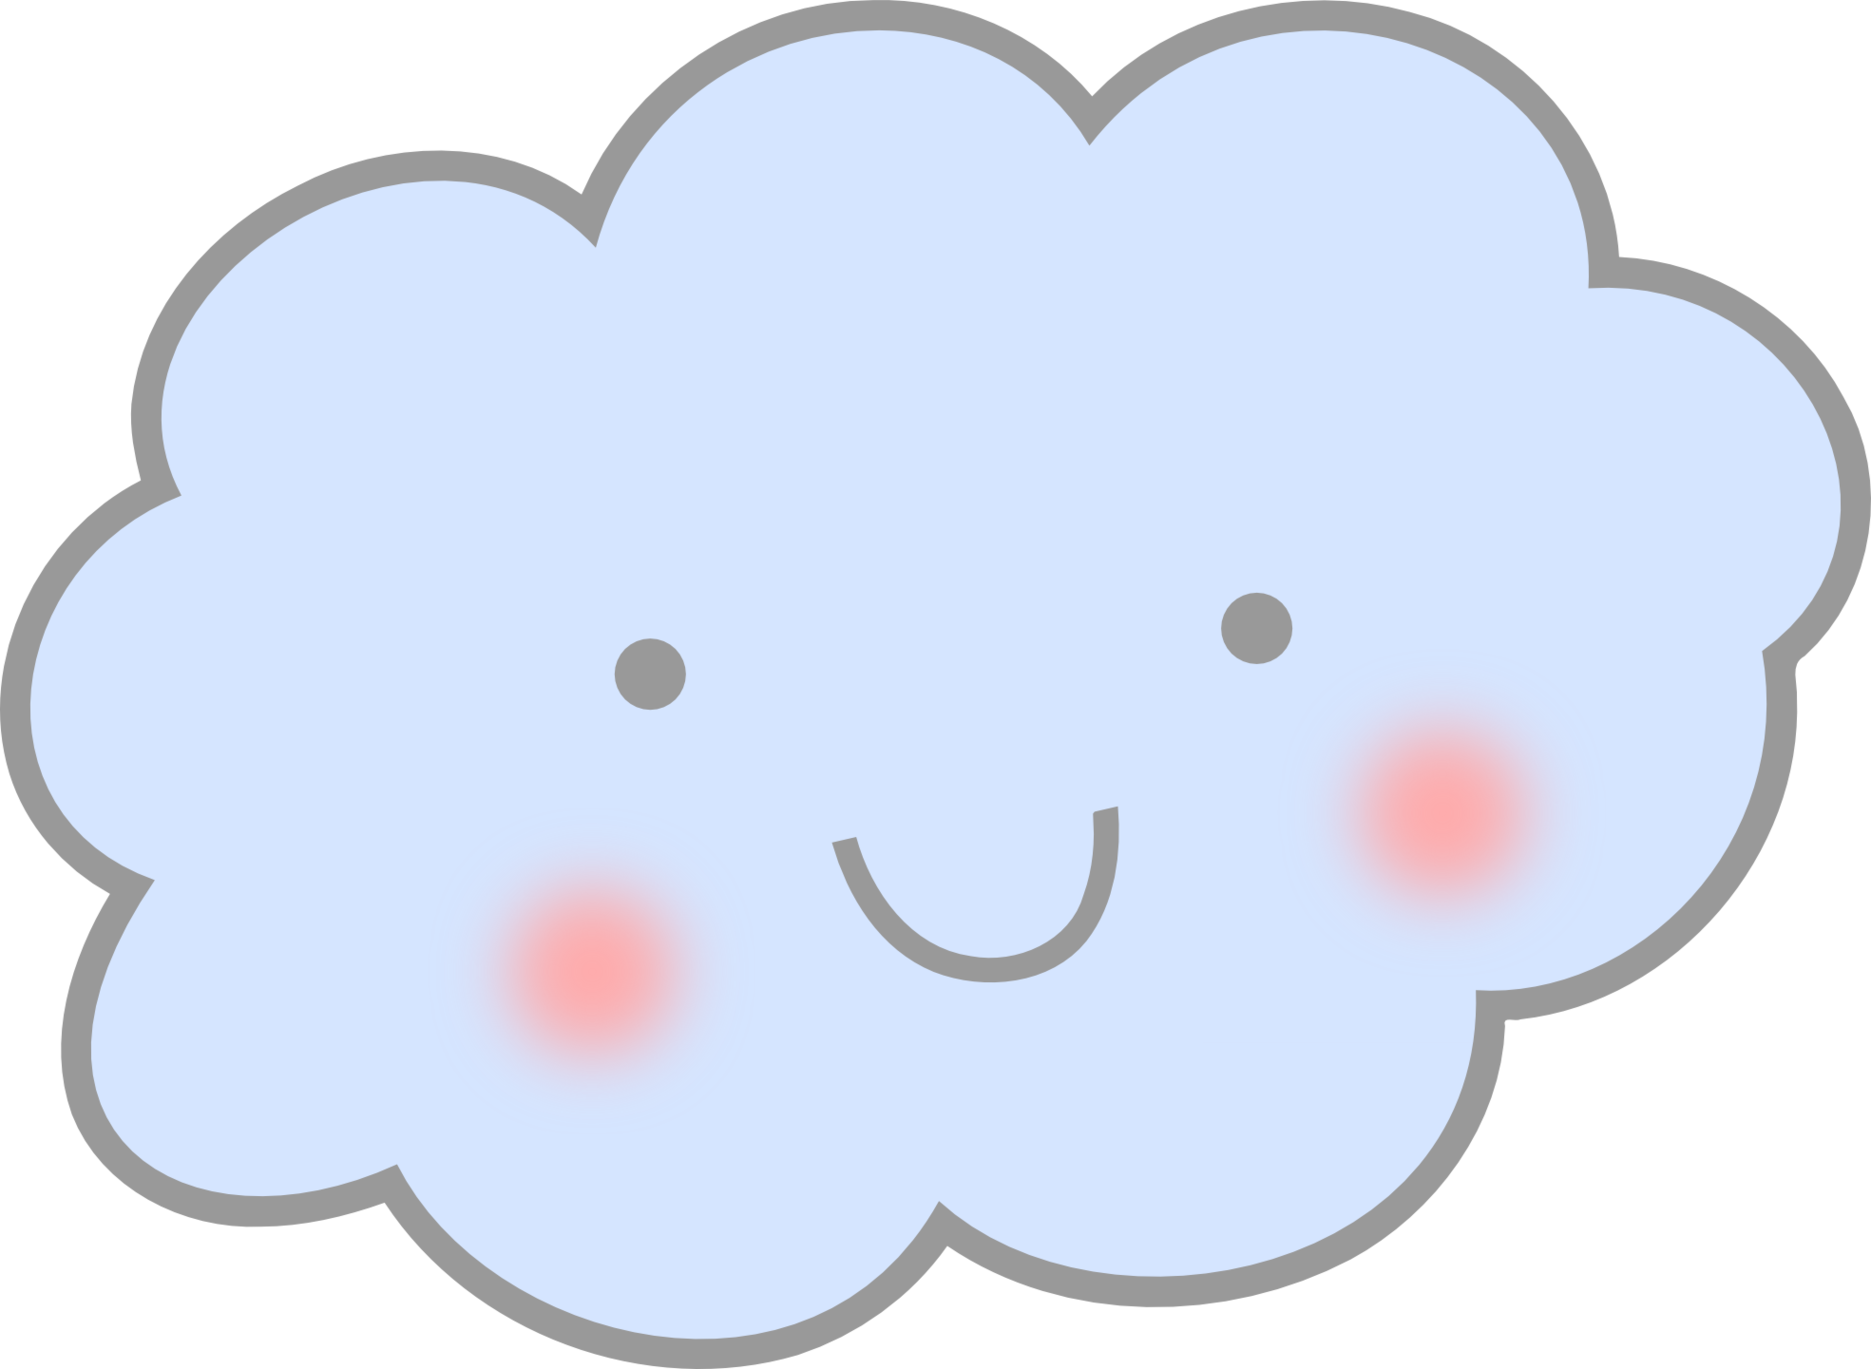 Cloud clipart animated, Cloud animated Transparent FREE for